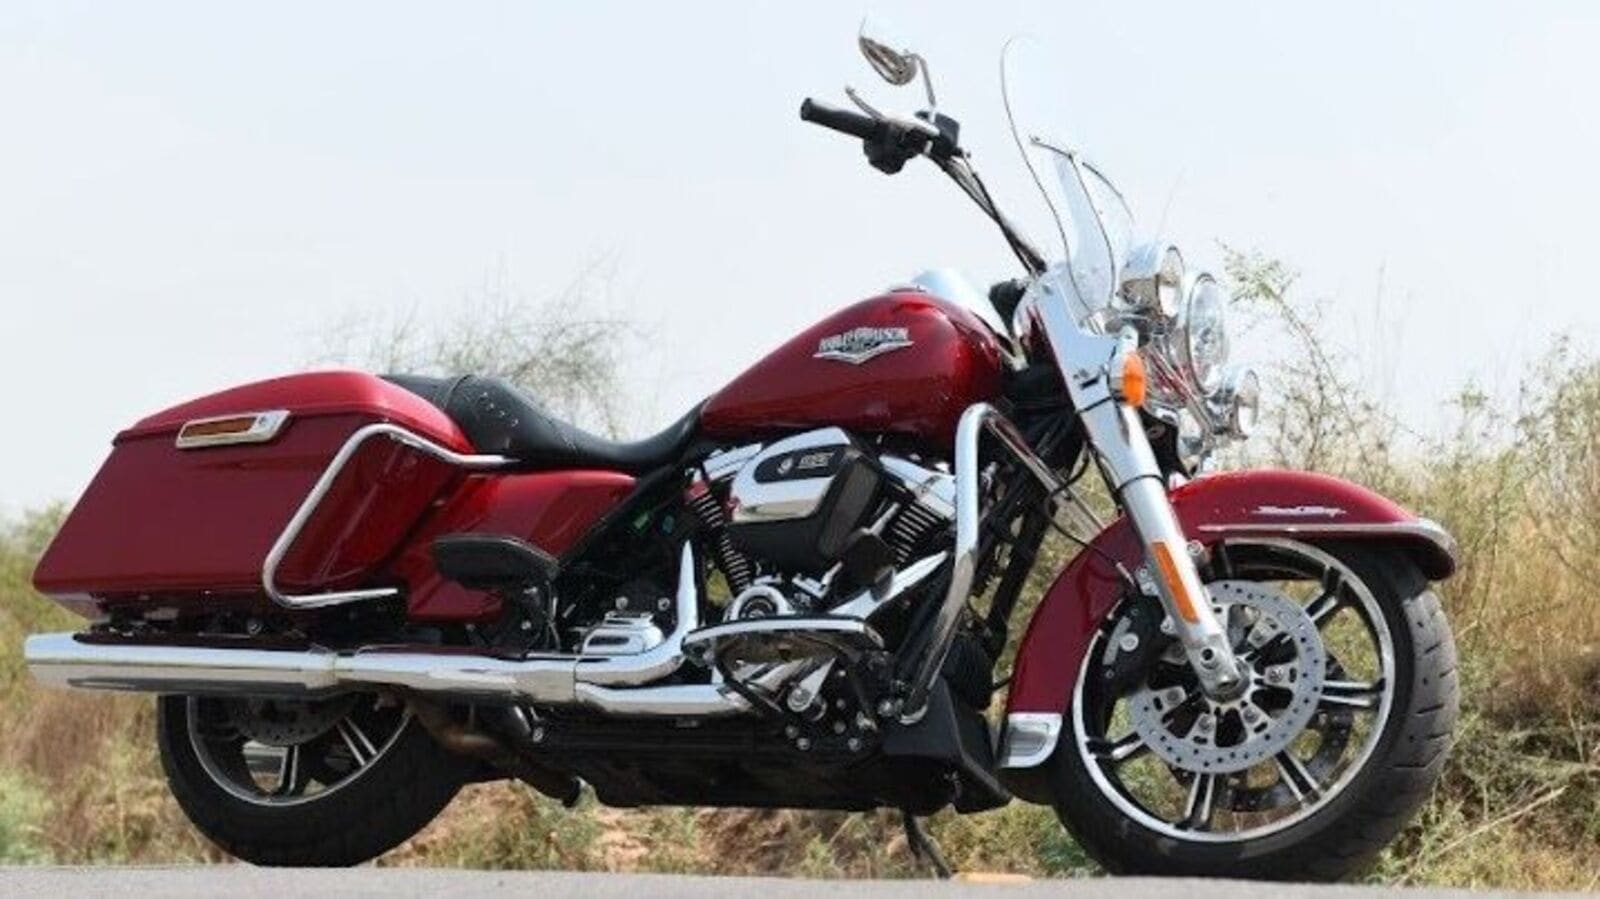 21 Harley Davidson Road King Road Test Review Larger Than Life Cruiser Review